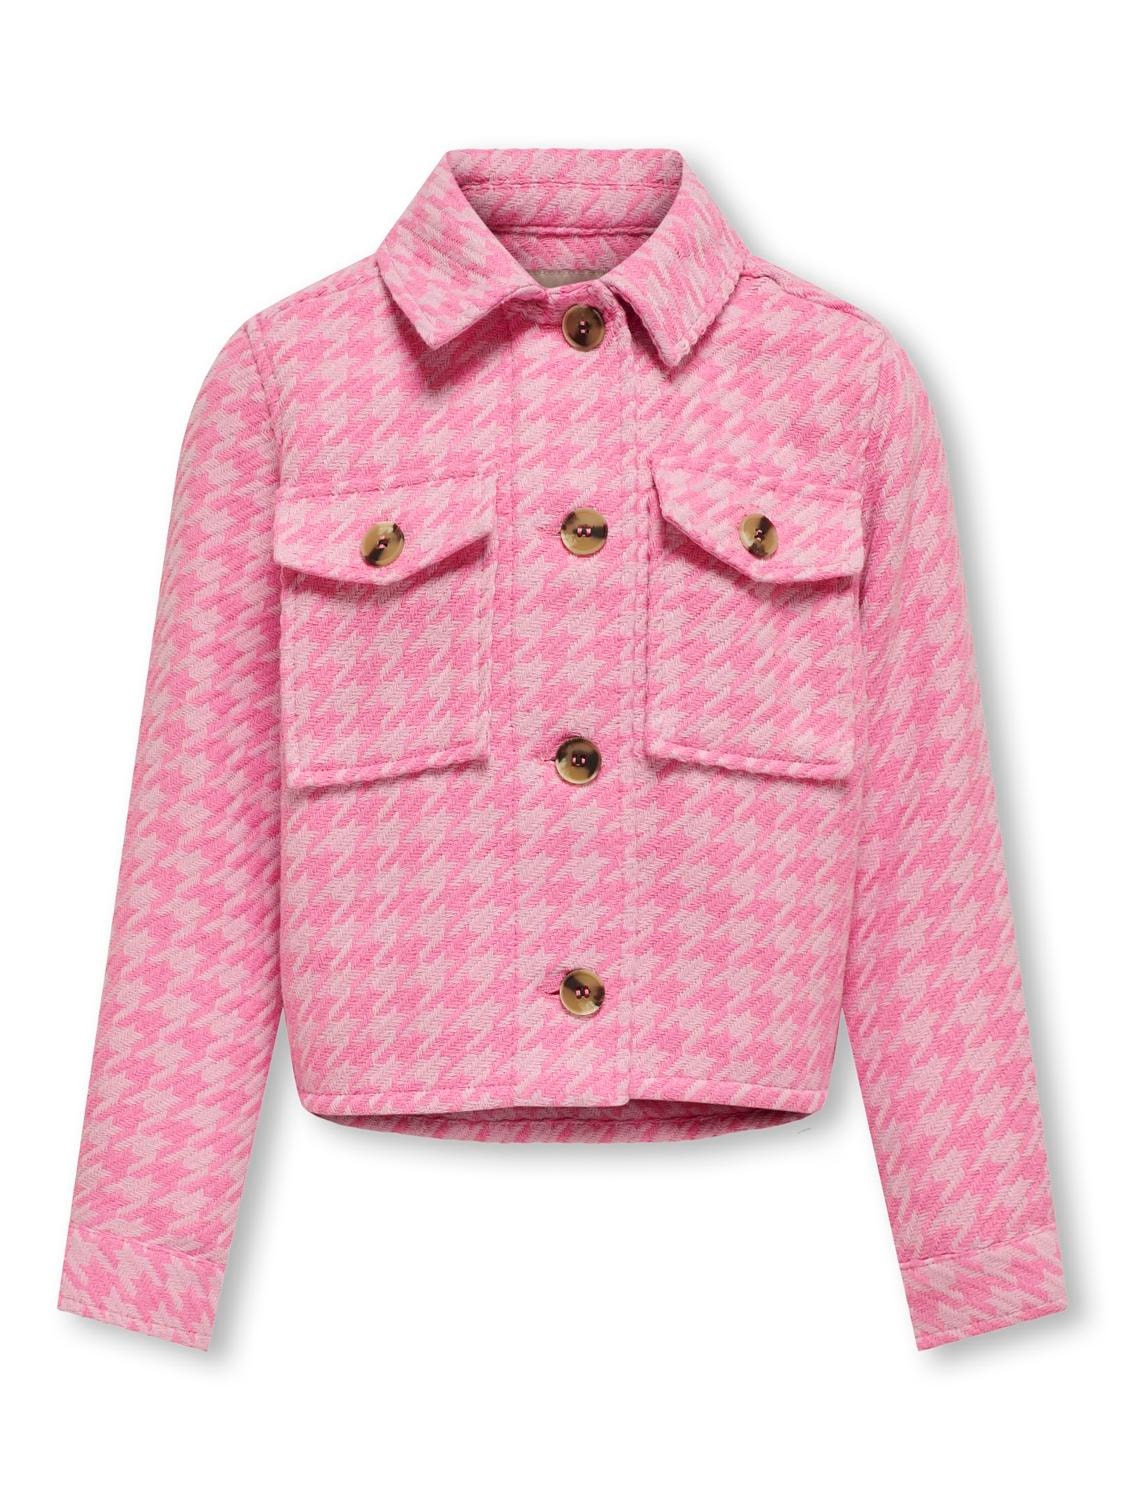 ONLY Checked jacket -Begonia Pink - 15310825